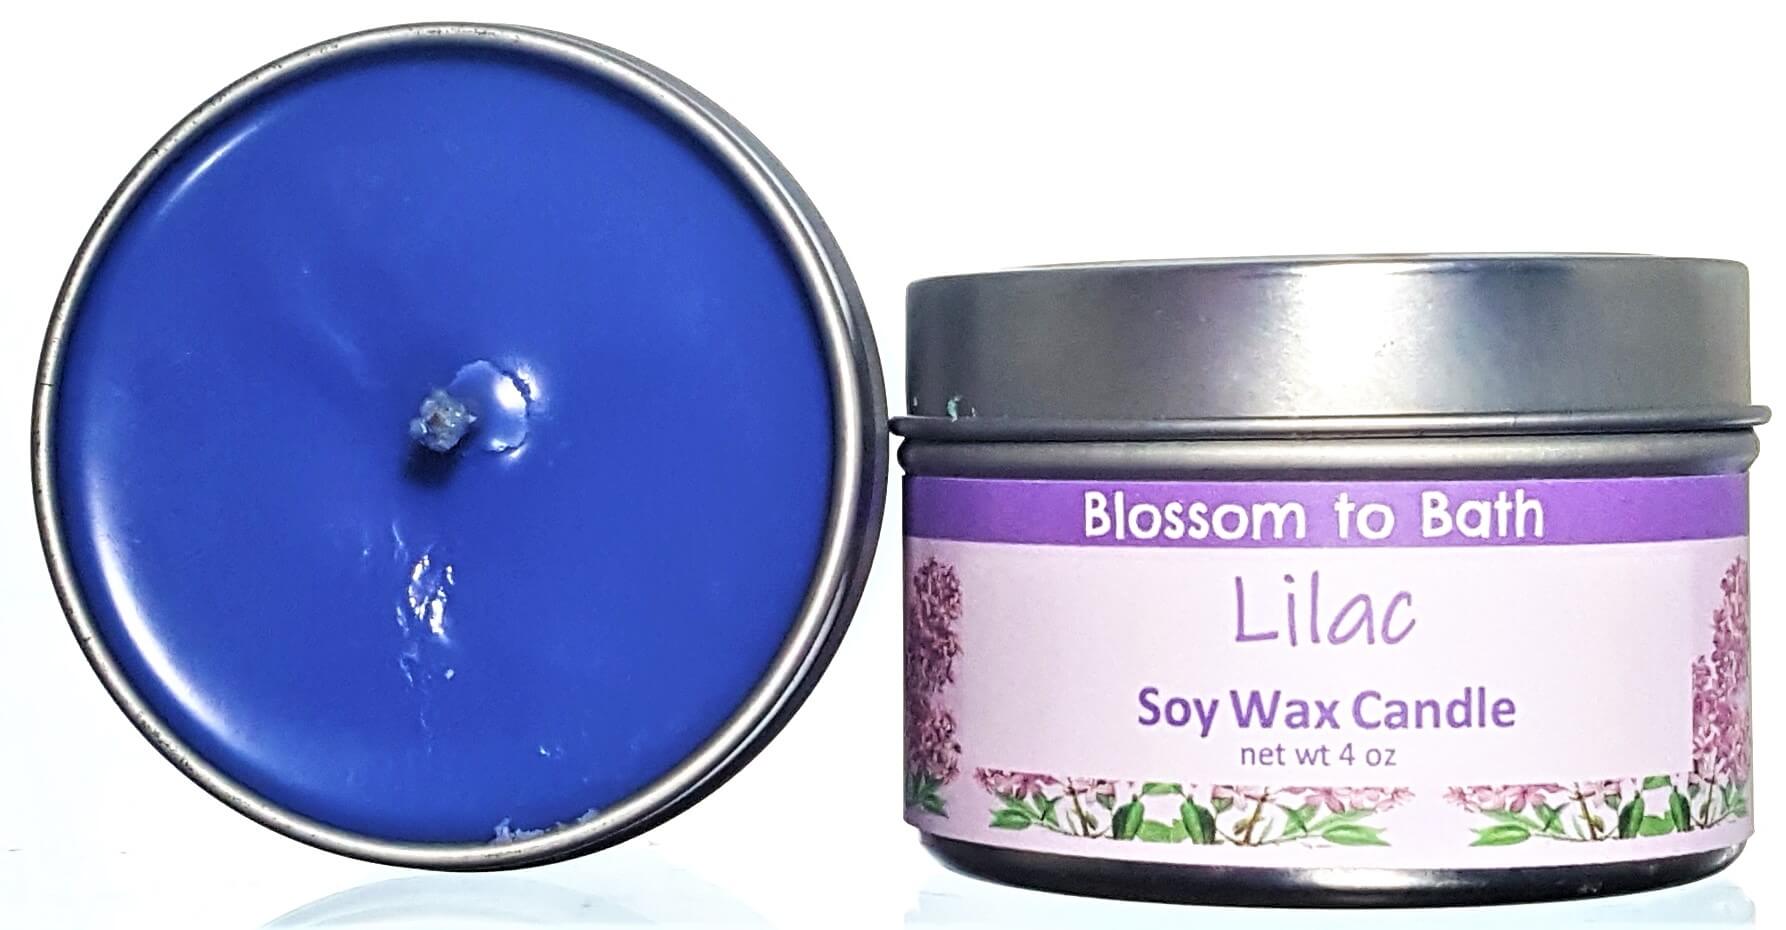 Buy Blossom to Bath Lilac Soy Wax Candle from Flowersong Soap Studio.  Fill the air with a charming fragrance that lasts for hours  The scent of a freshly blooming lilac bush, the embodiment of spring flowers.